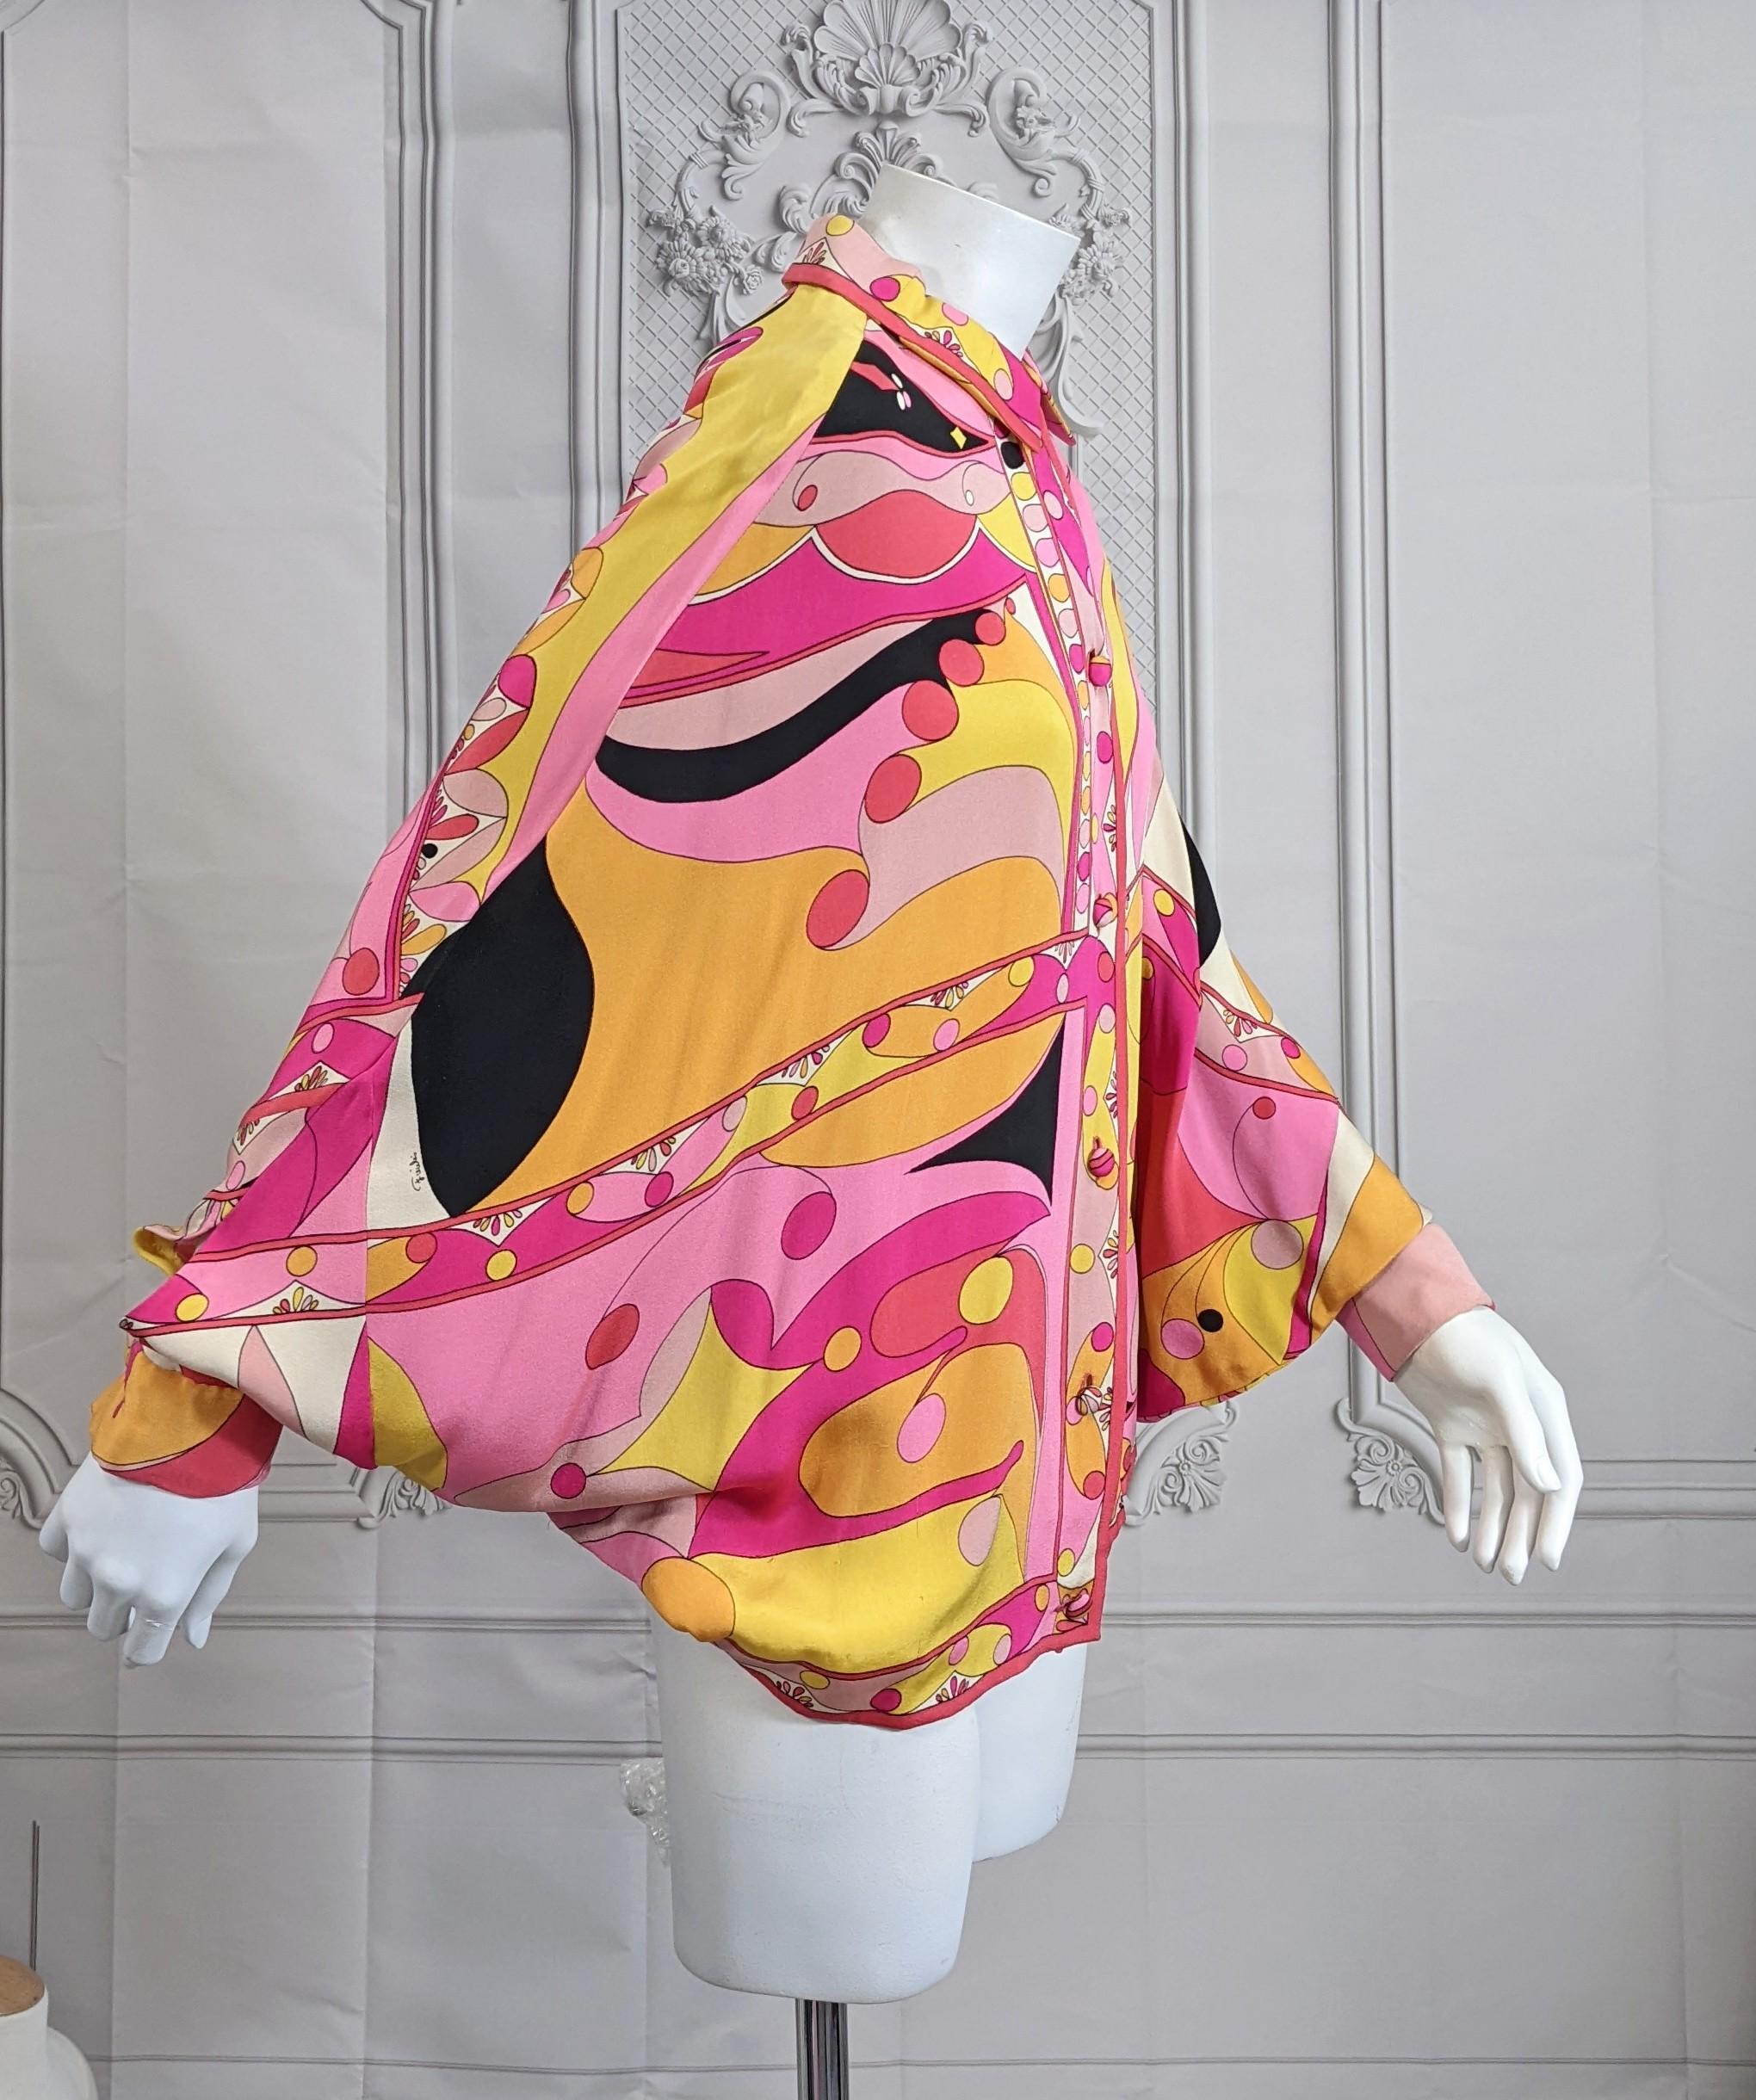 Emilio Pucci Silk Crepe Bat Wing Blouse In Excellent Condition For Sale In New York, NY